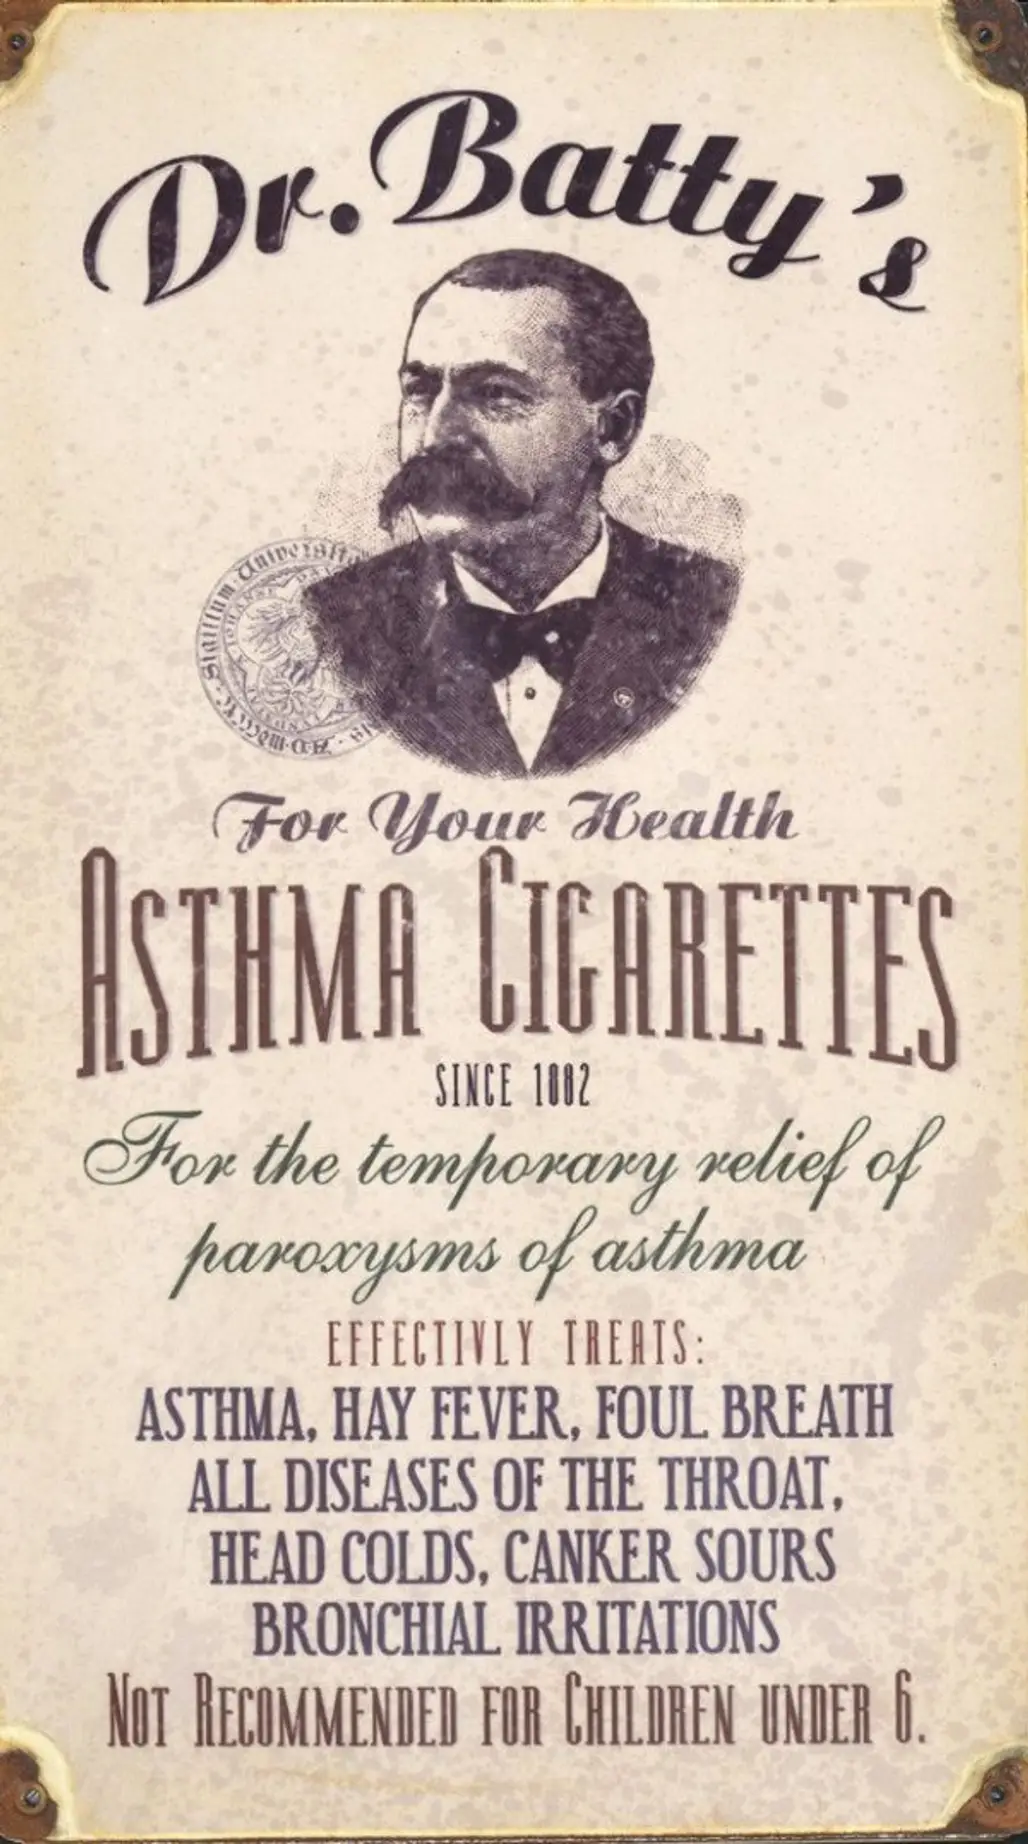 These Asthma Cigarettes Are Not Recommended for Children under Six